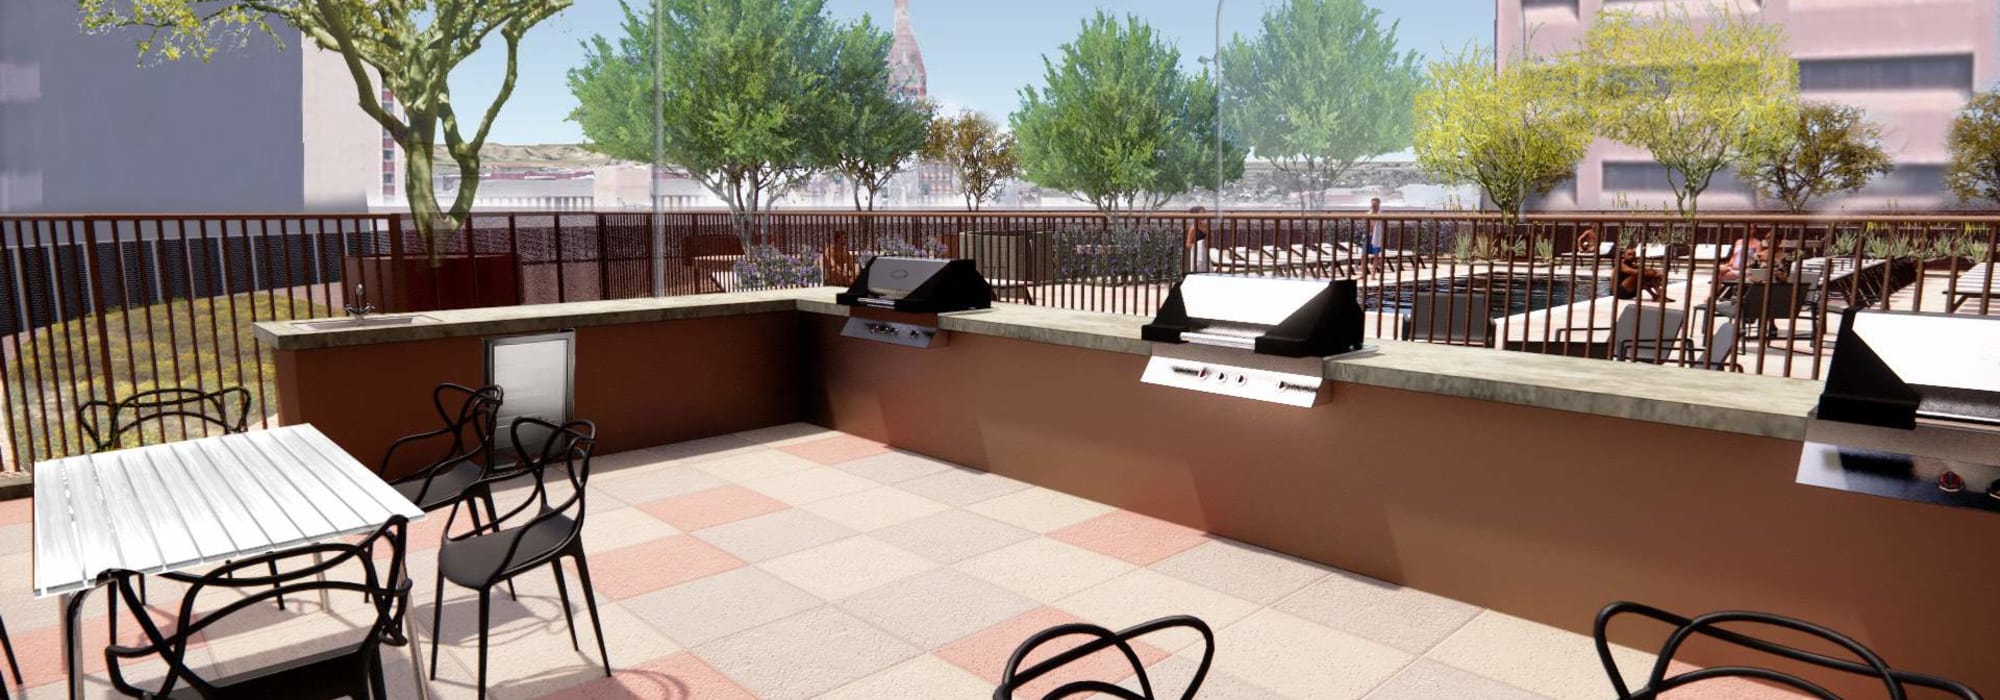 Render of our outdoor grill stations at PALMtower in Phoenix, Arizona